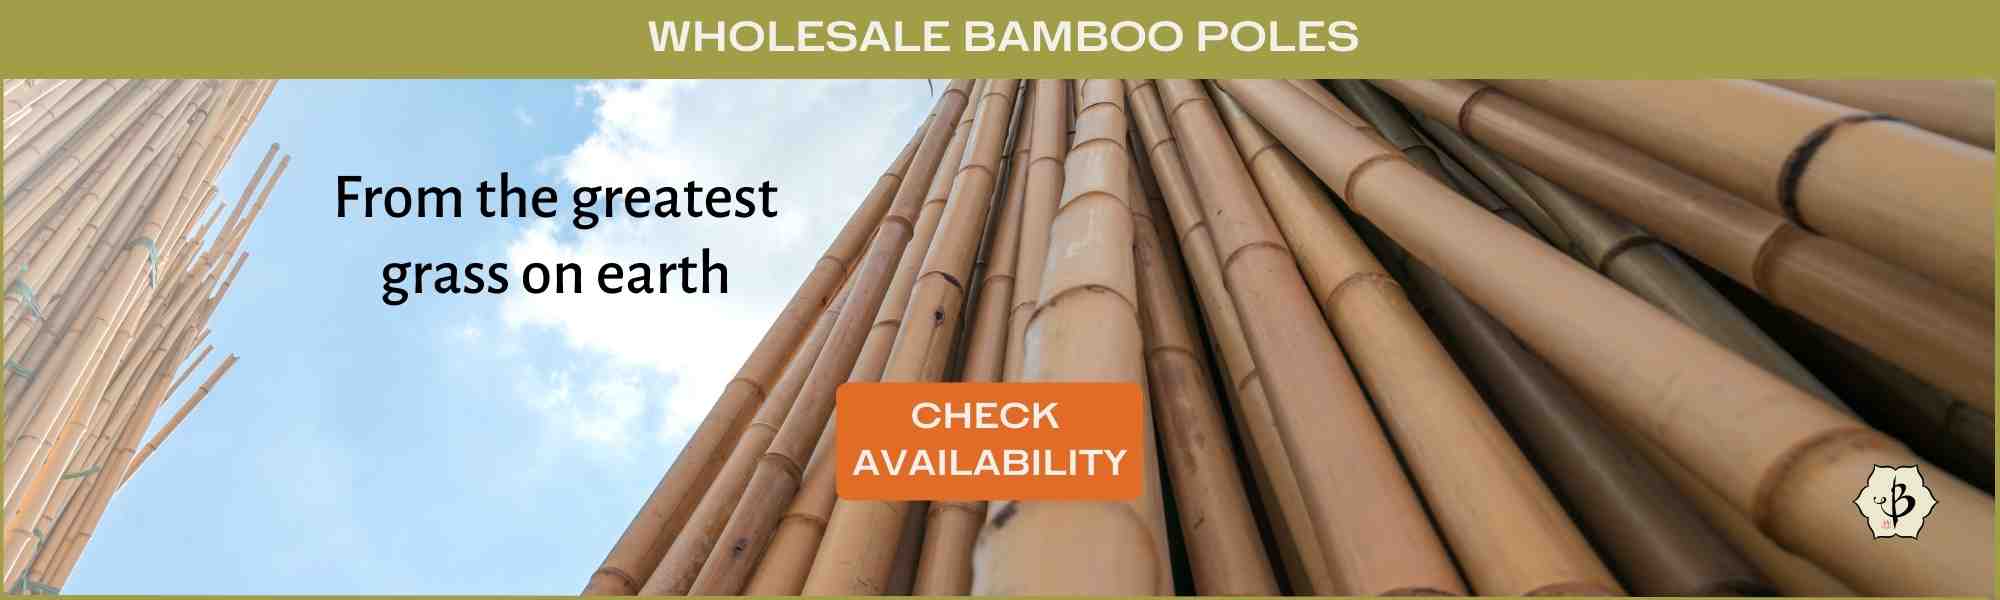 Wholesale bamboo poles banner